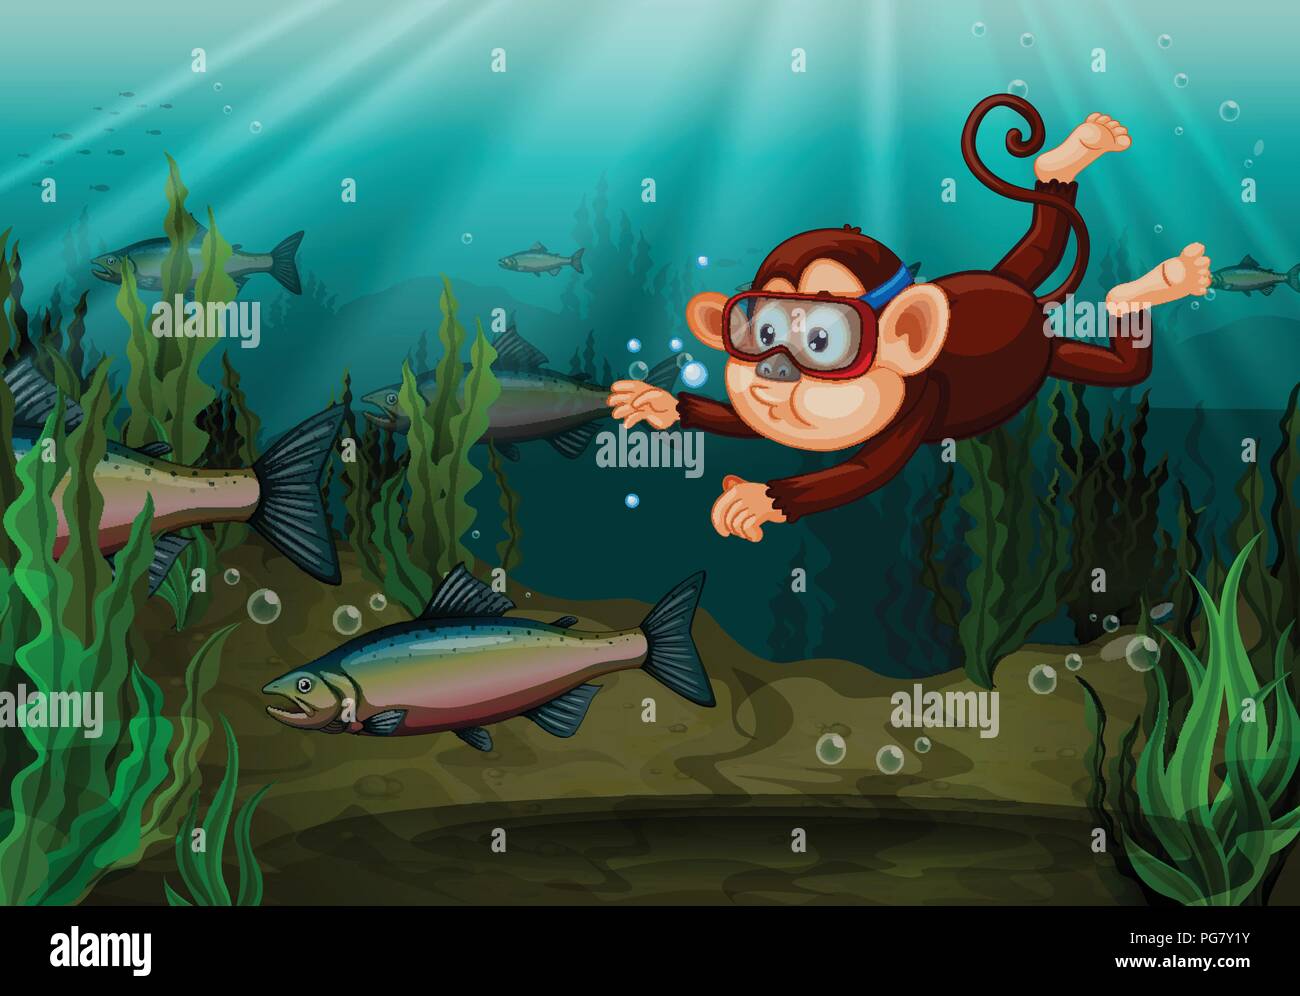 A monkey catching fish in the river illustration Stock Vector